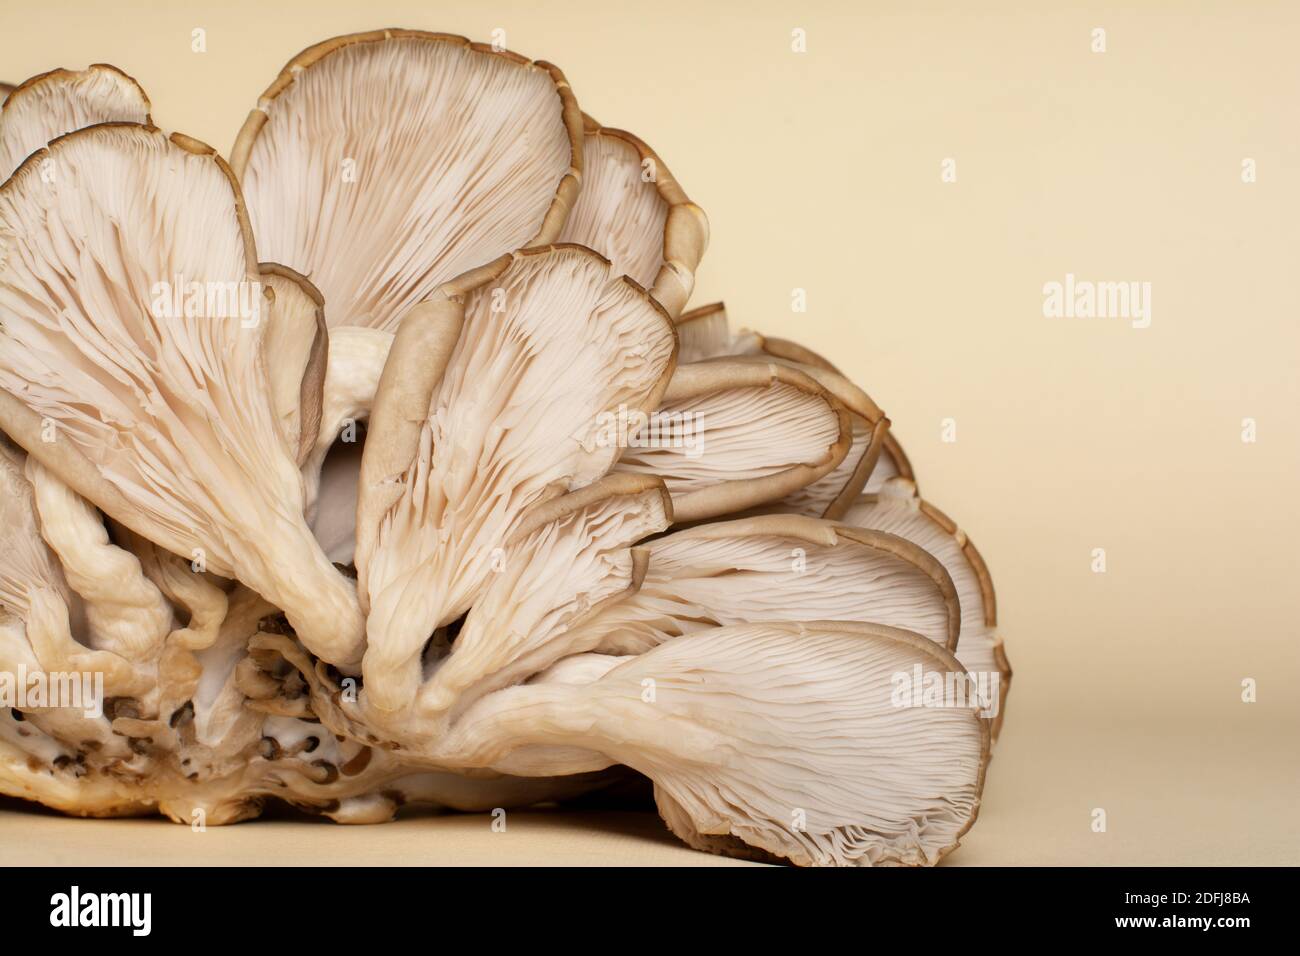 Fleshy gills and rudimentary stipes of oyster mushrooms. Stock Photo